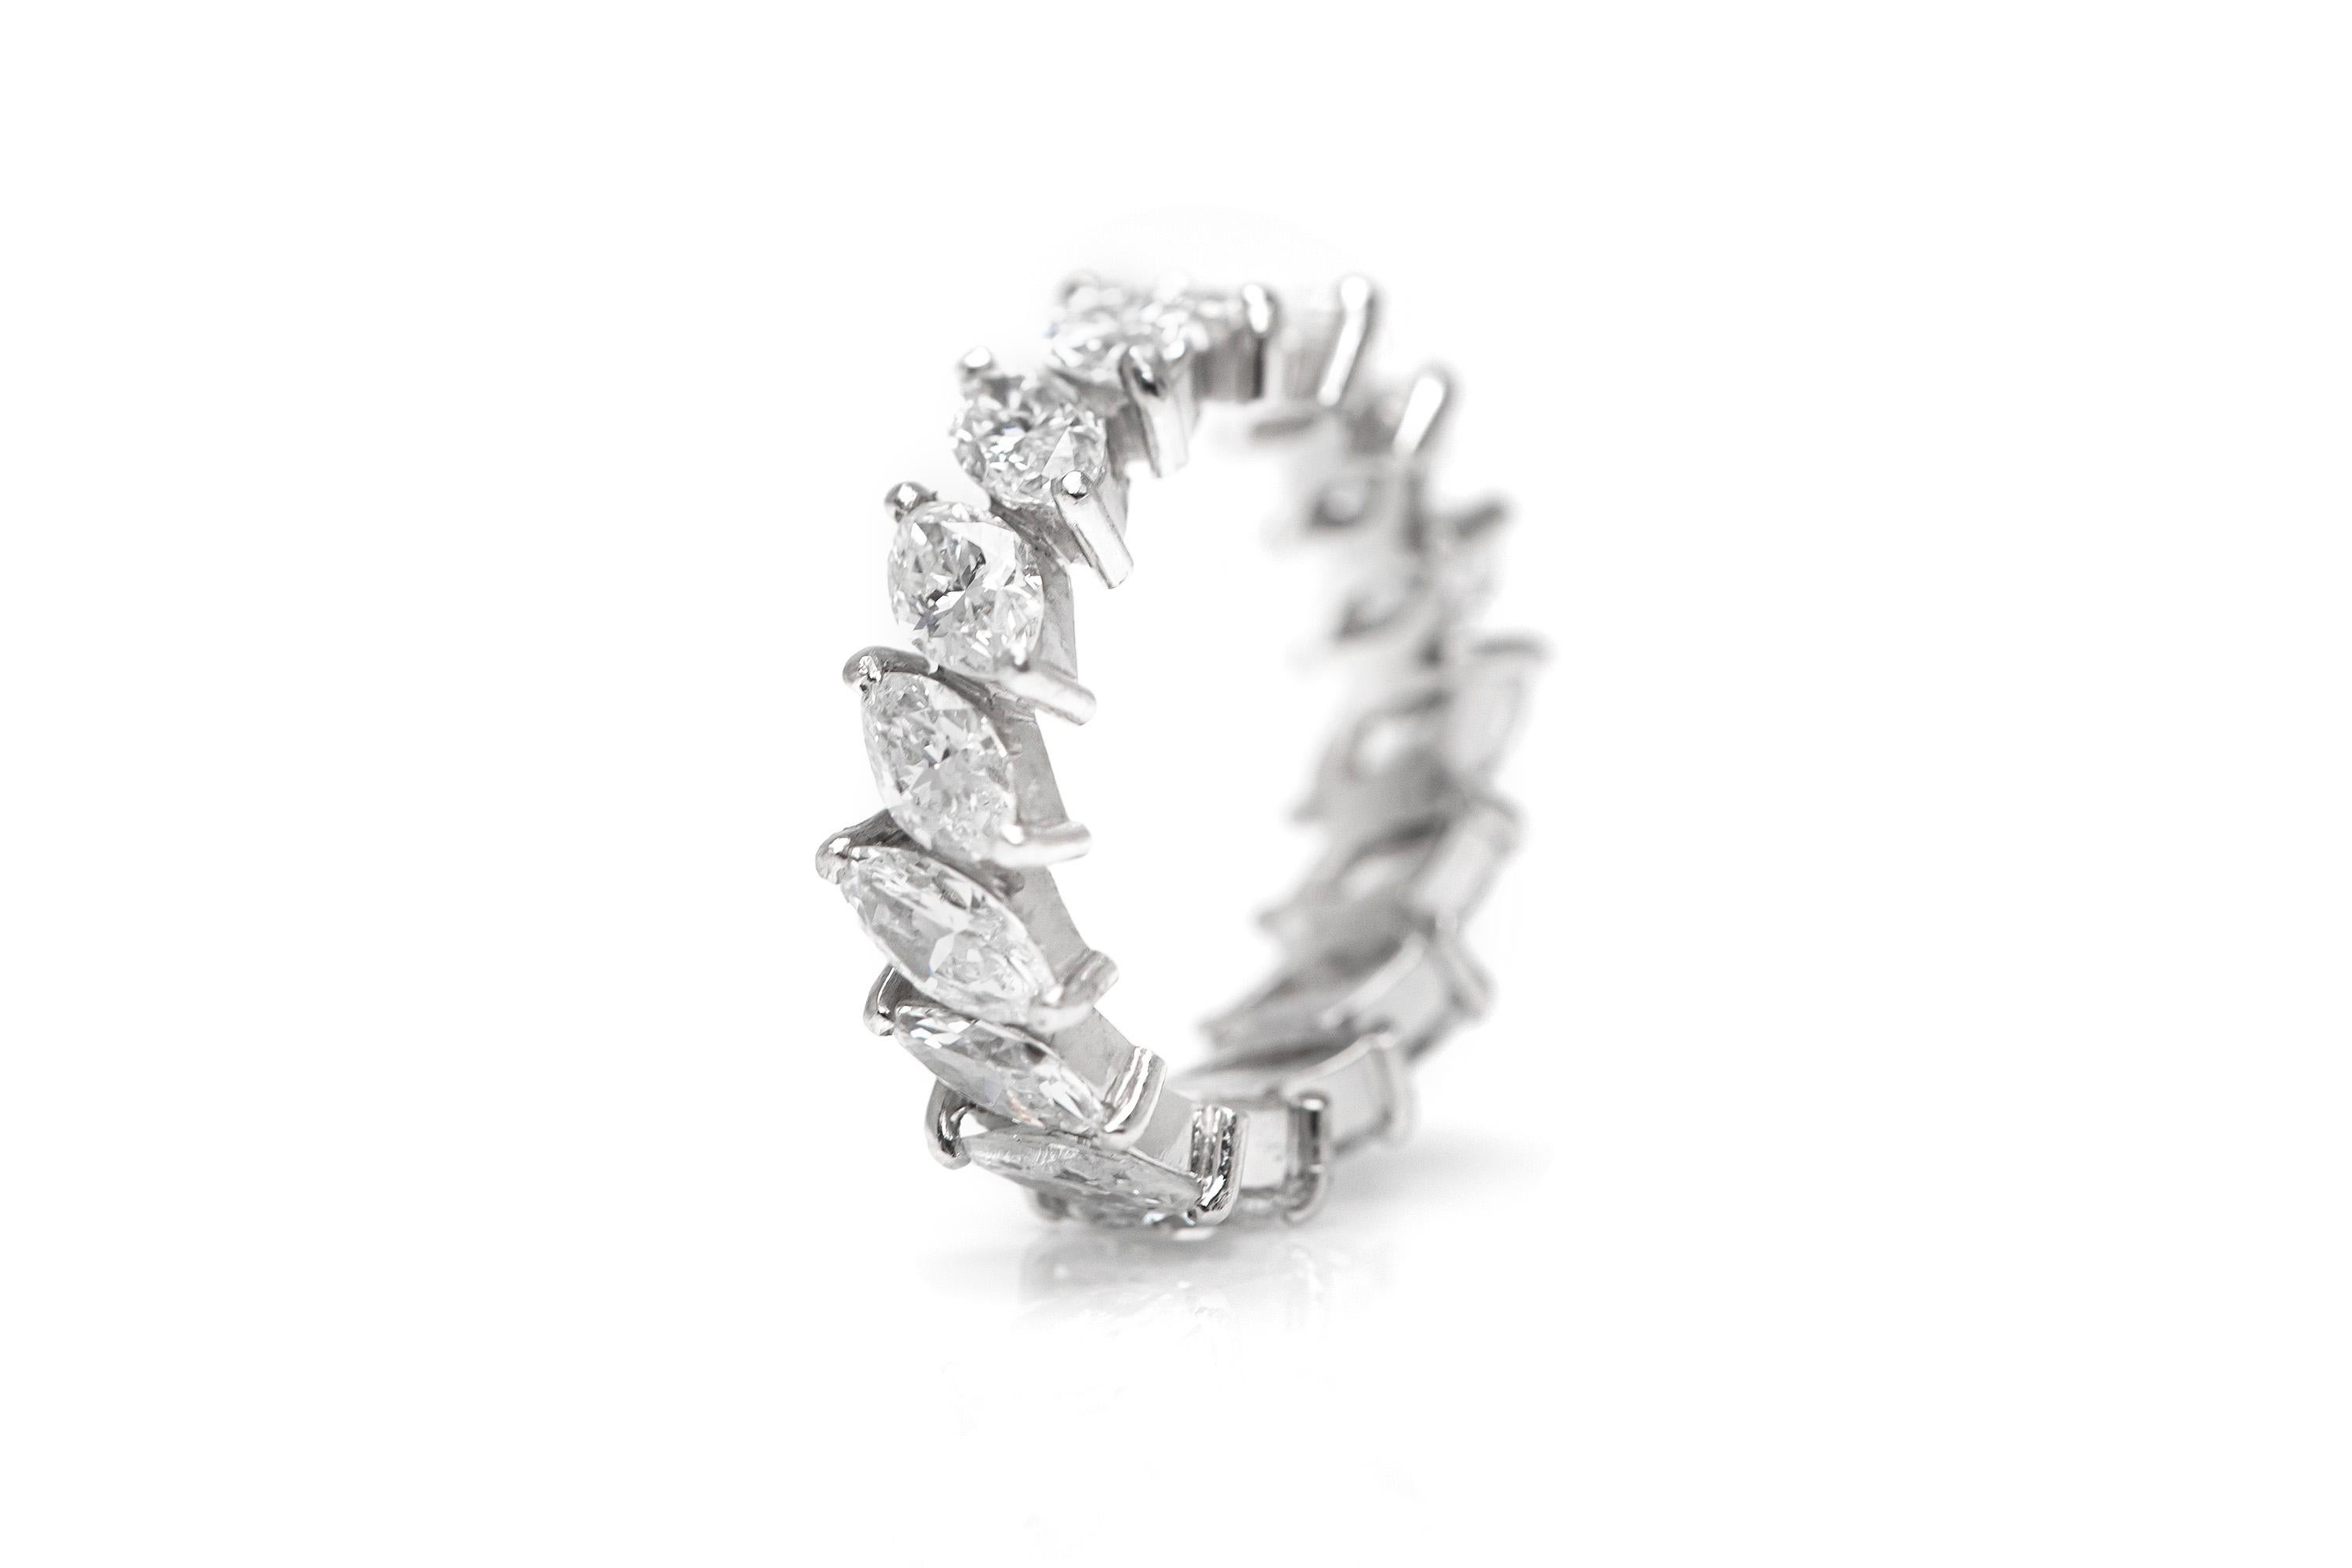 Finely crafted in platinum featuring approximately 5.00 carats of slanted marquise cut diamonds. Each stone weighs approximately 0.30 carat.